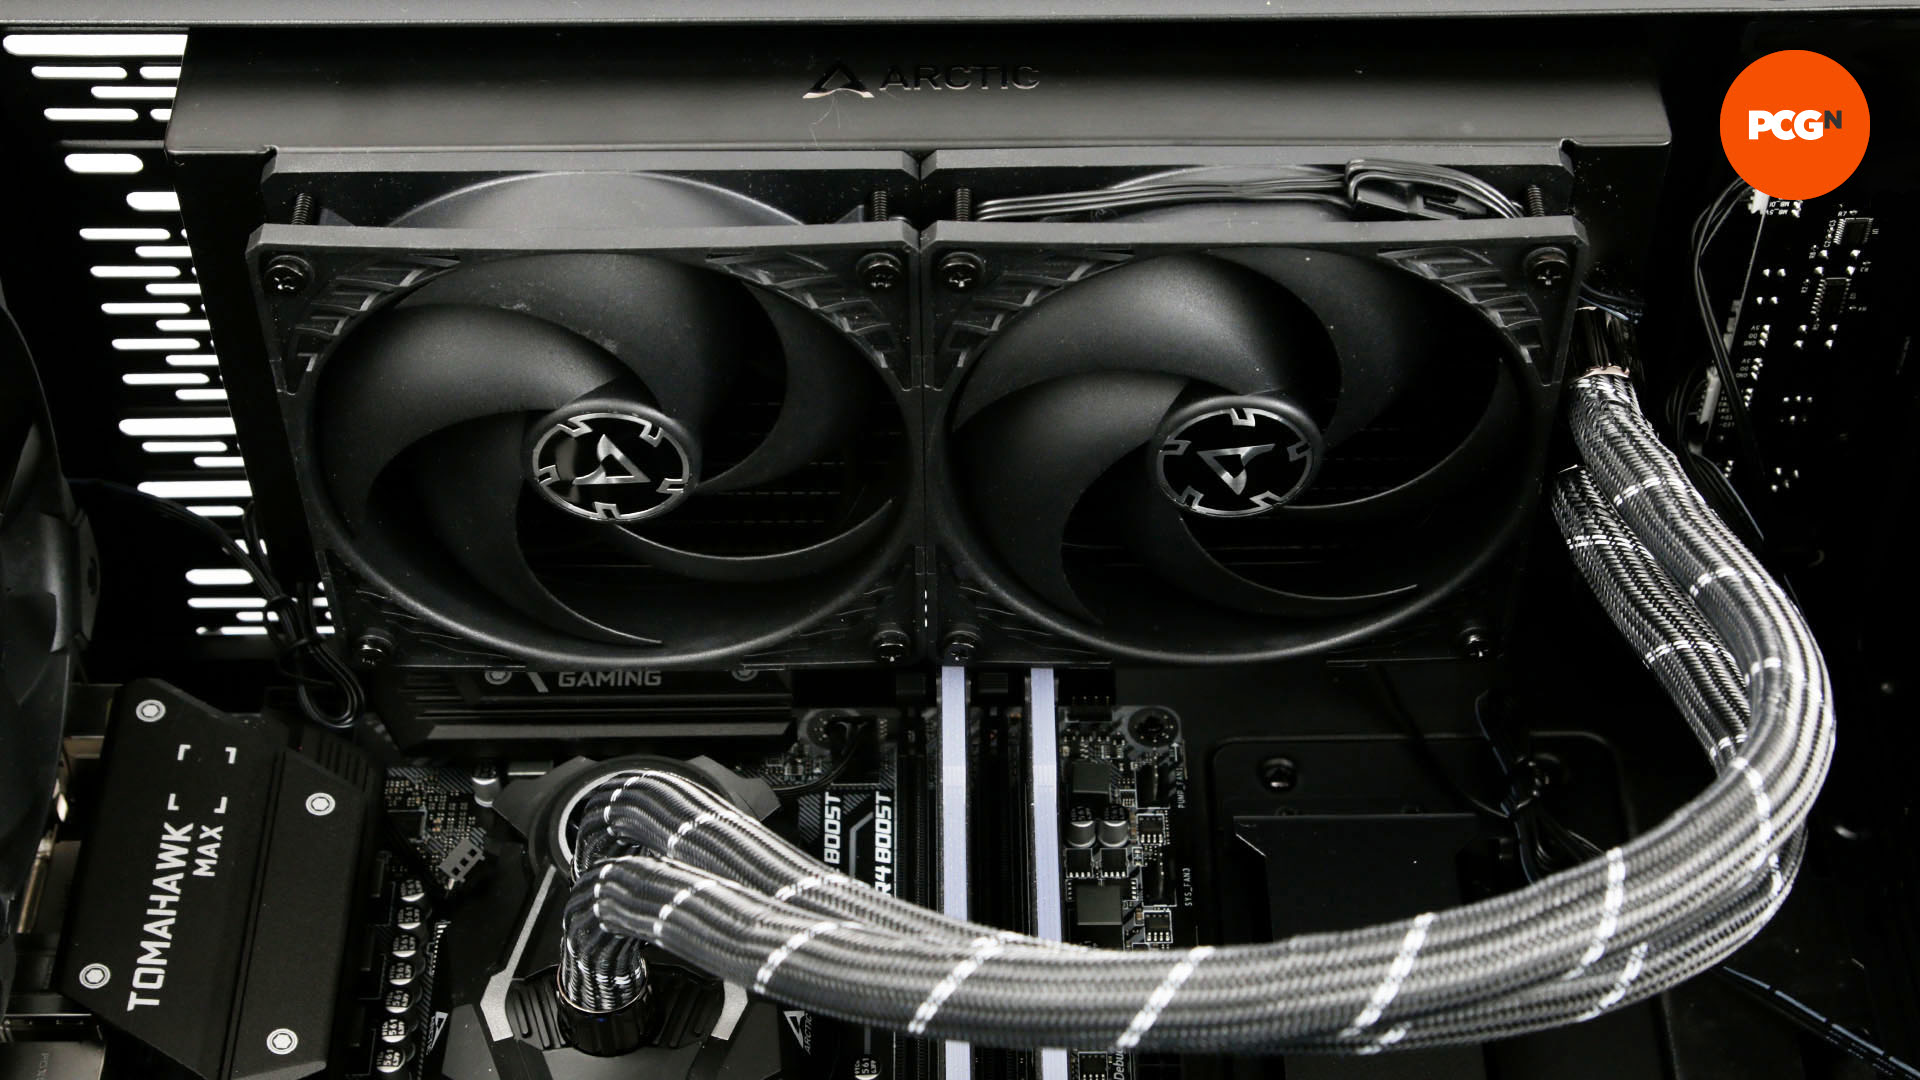 An AIO cooler radiator mounted to the top of a PC case for PC cooling